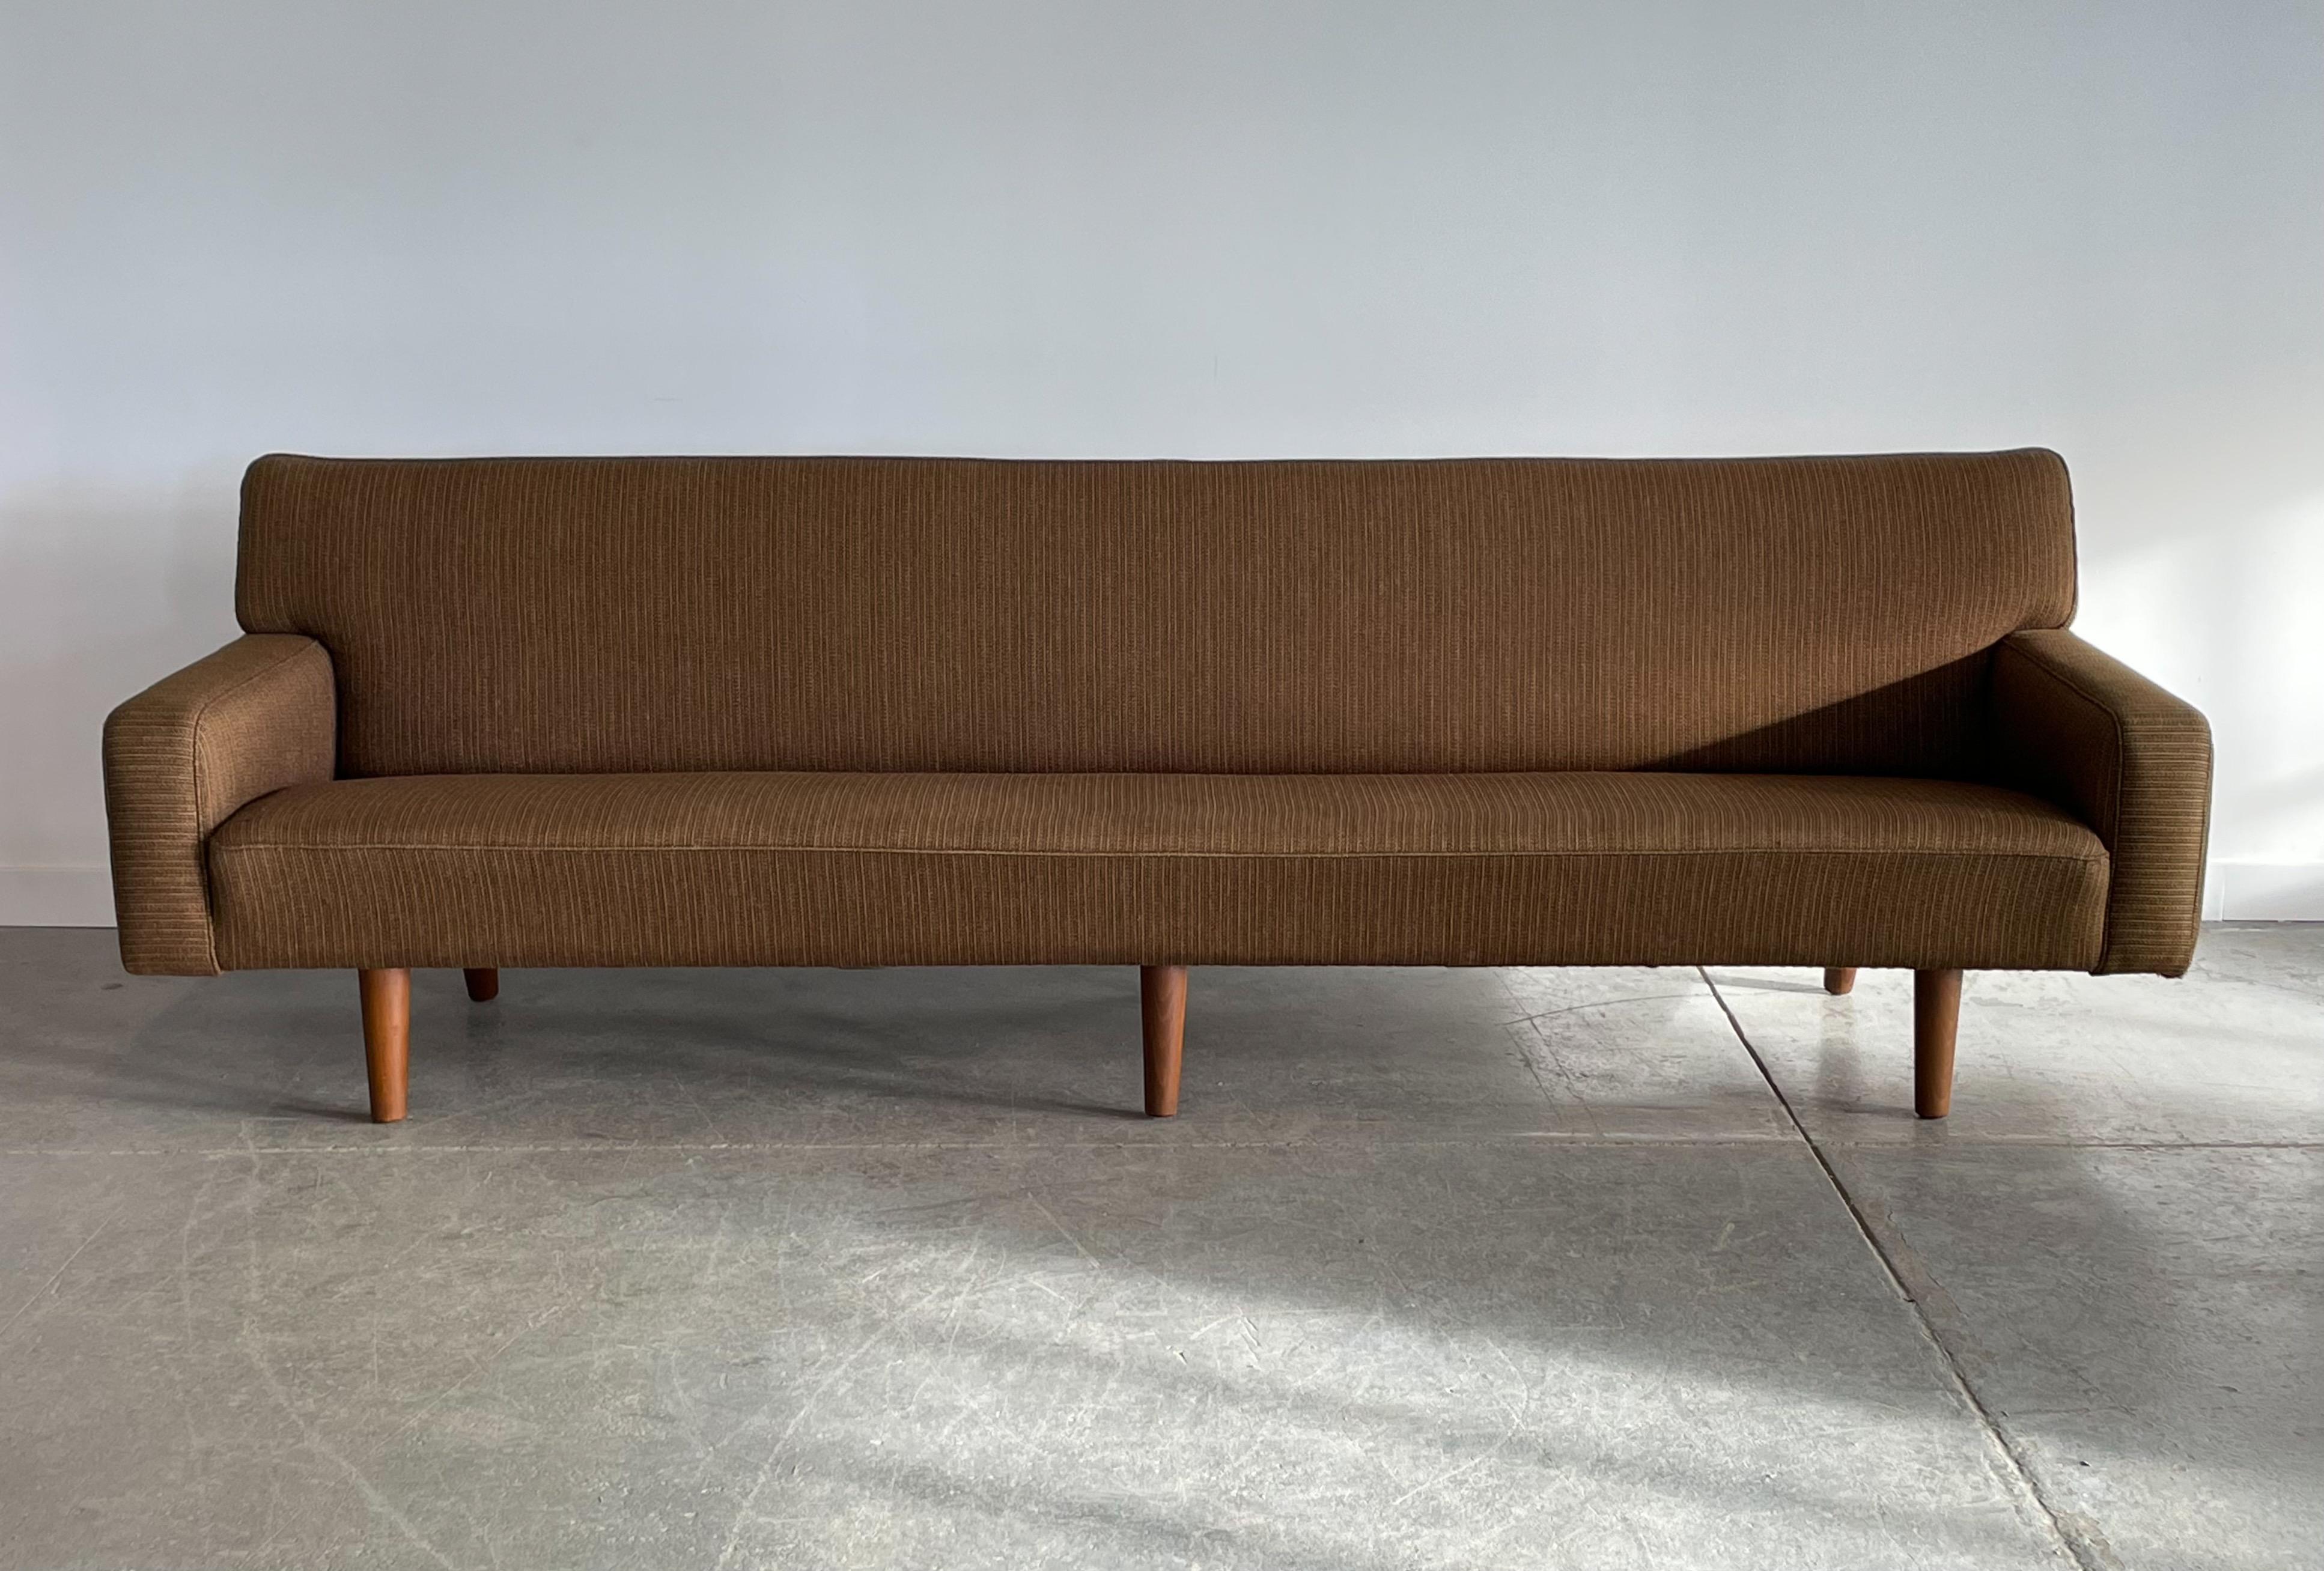 Monumental and rare four-seater AP33 sofa designed by Hans Wegner for AP Stolen, Denmark. This piece features angled oak legs and the original wool upholstery. It has a streamlined and almost contemporary silhouette, which would make it at home in a